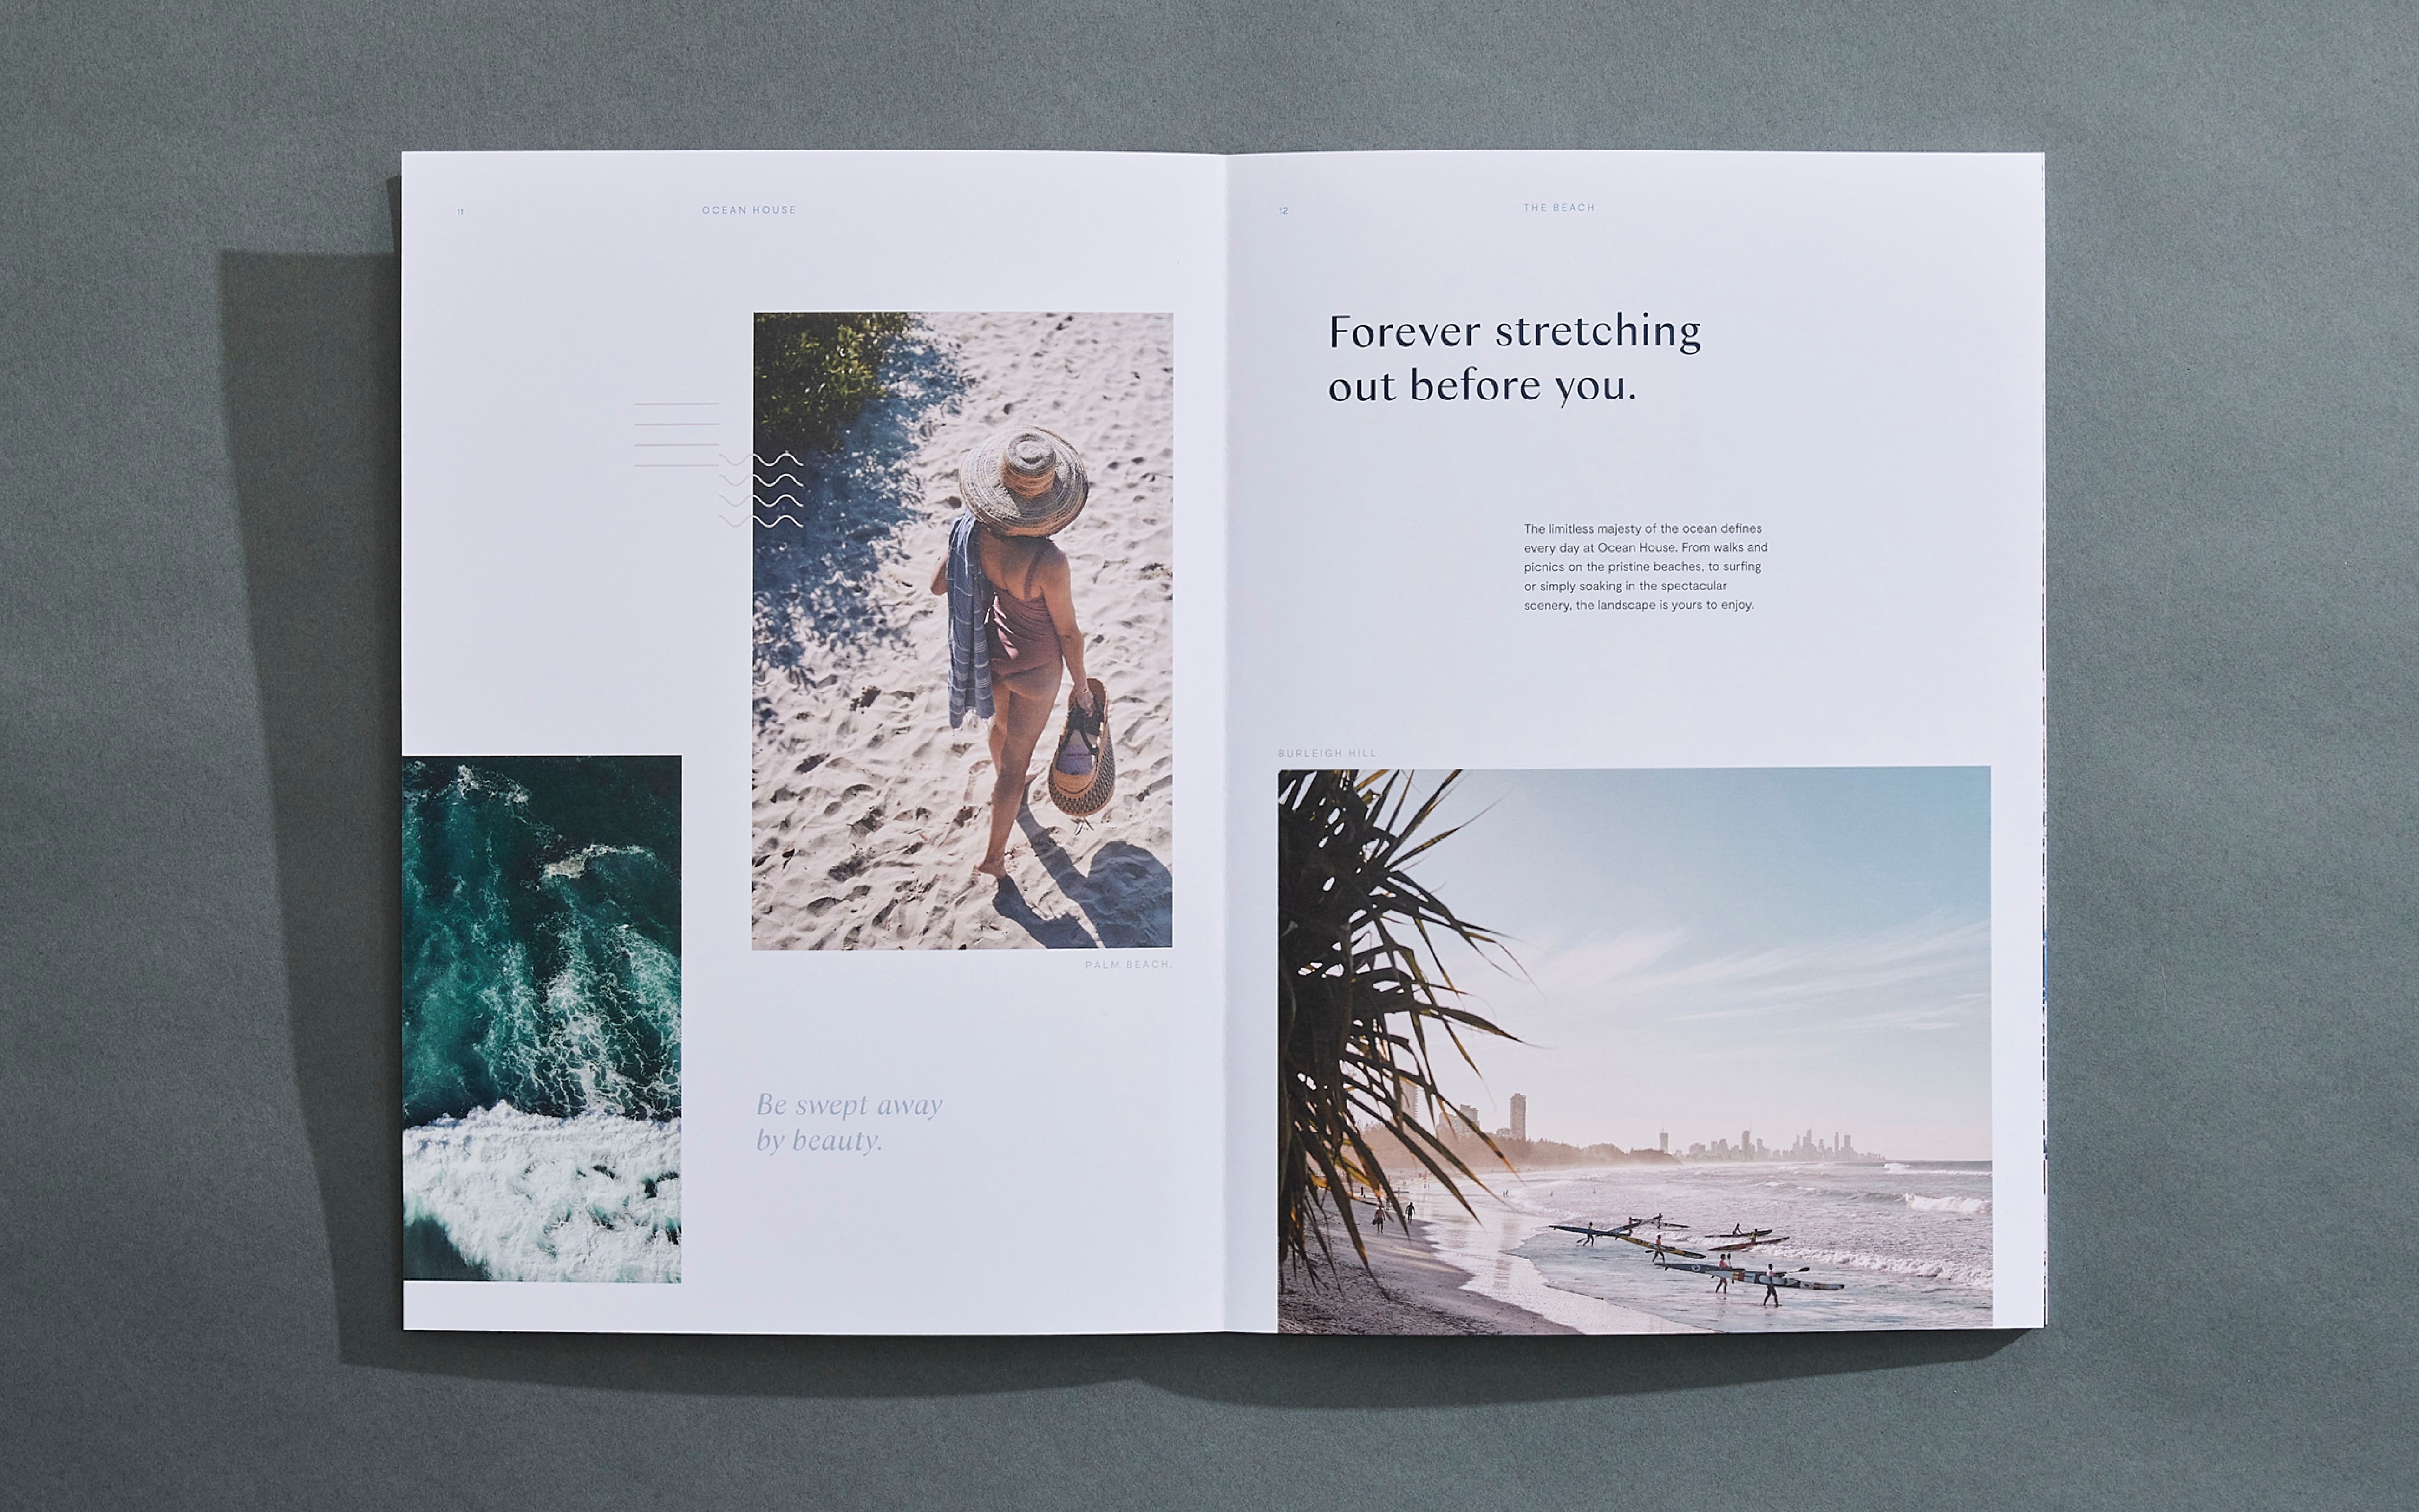 Ocean House interior spread showing lifestyle images of beach